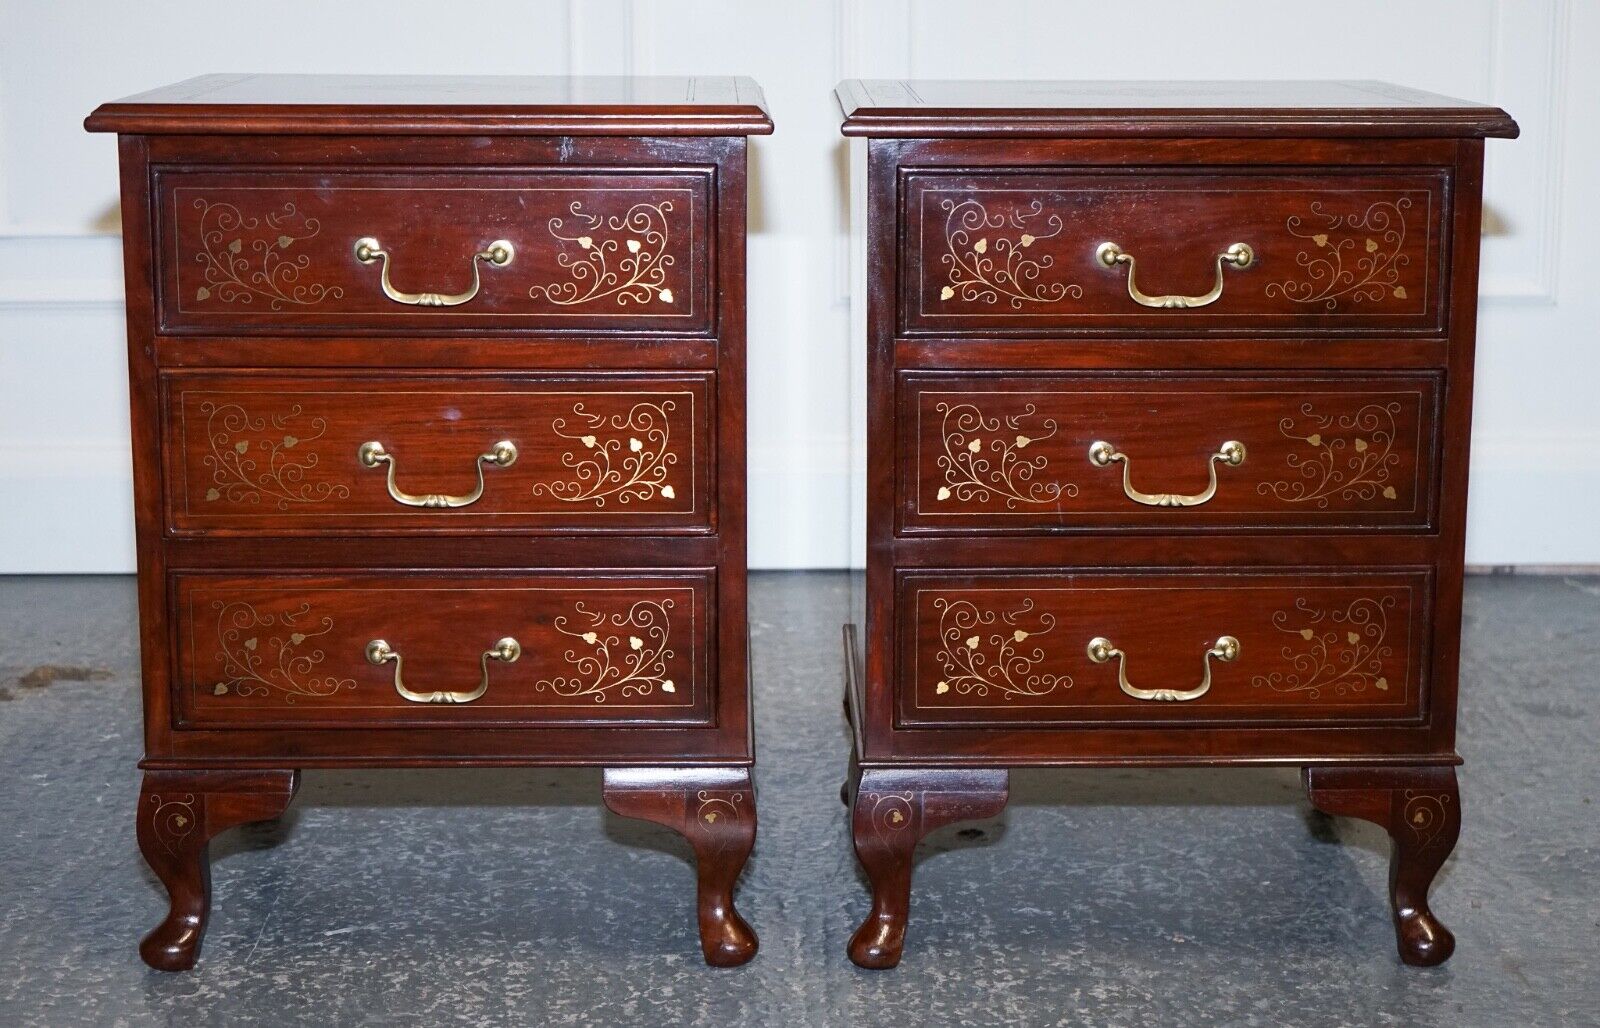 STUNNING PAIR OF BRASS INLIAD ANGLO INDIAN BEDSIDE TABLES NIGHTSTANDS